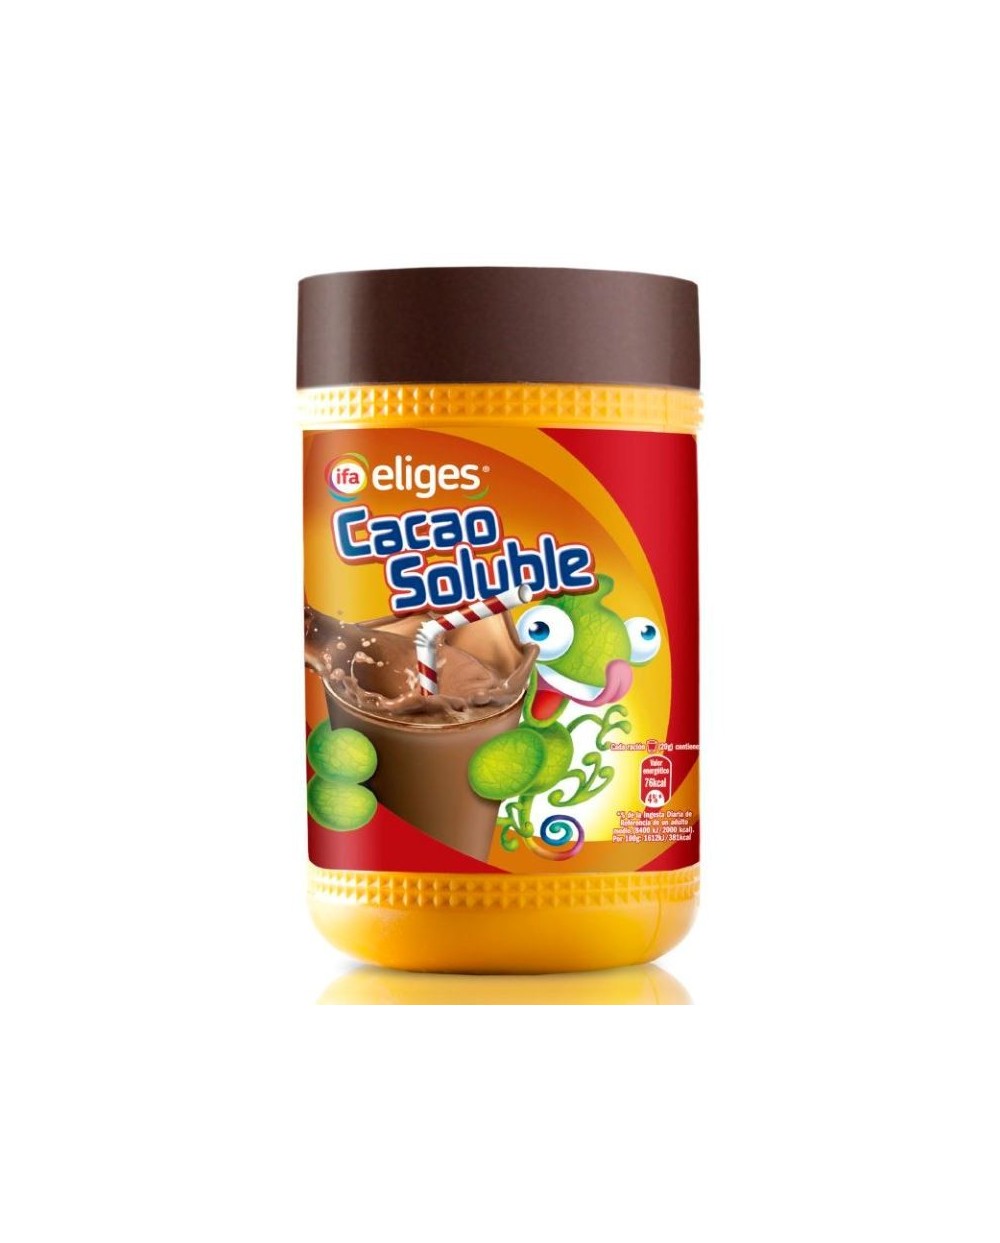 CACAO SOLUBLE IFA ELIGES 900 g.